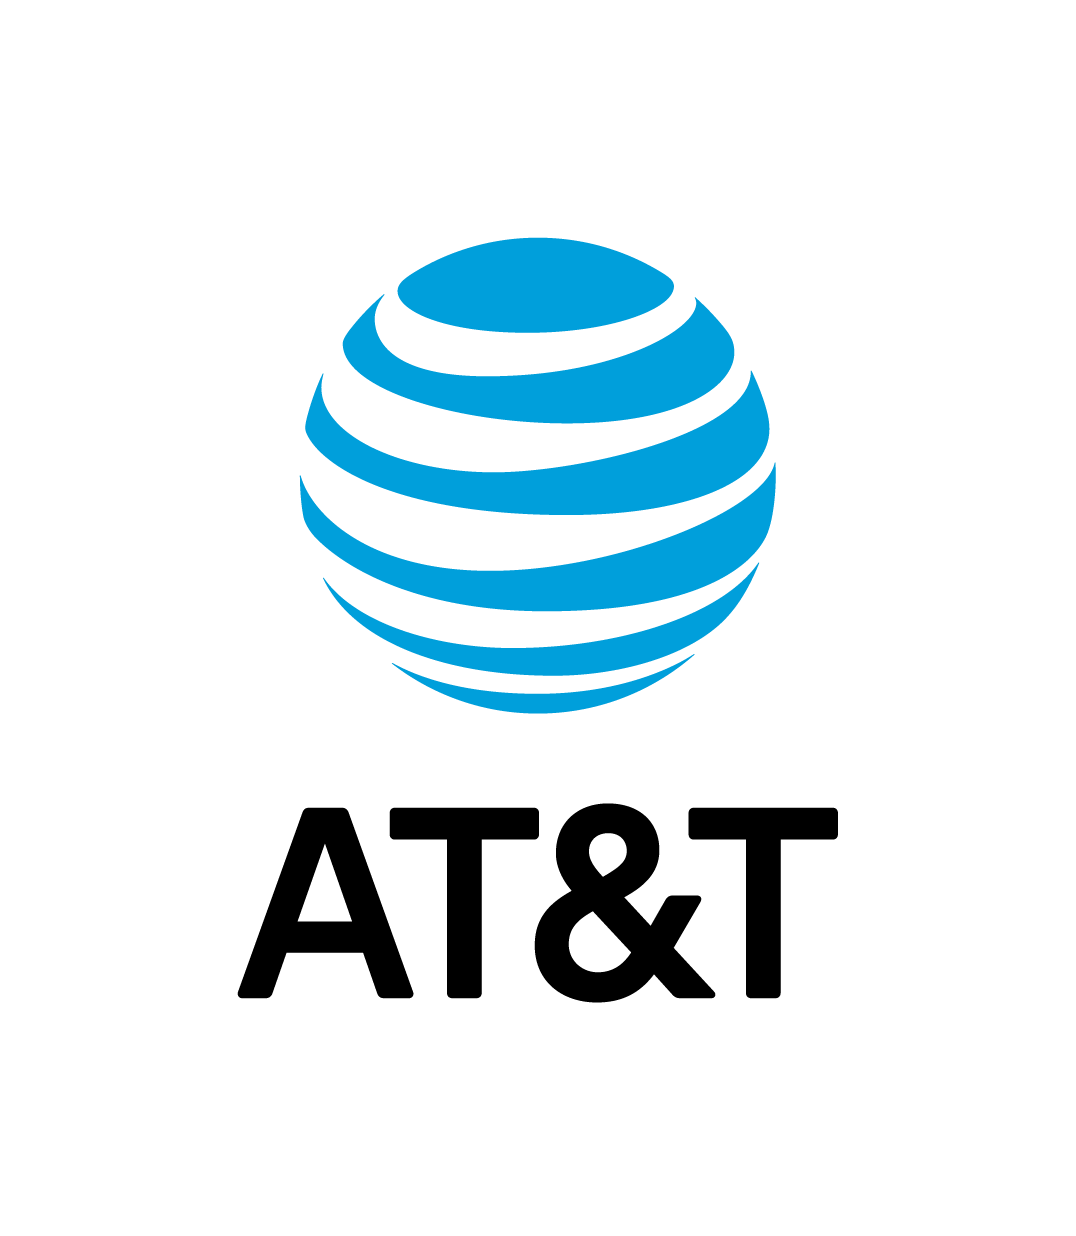 AT&T CyberSecurity